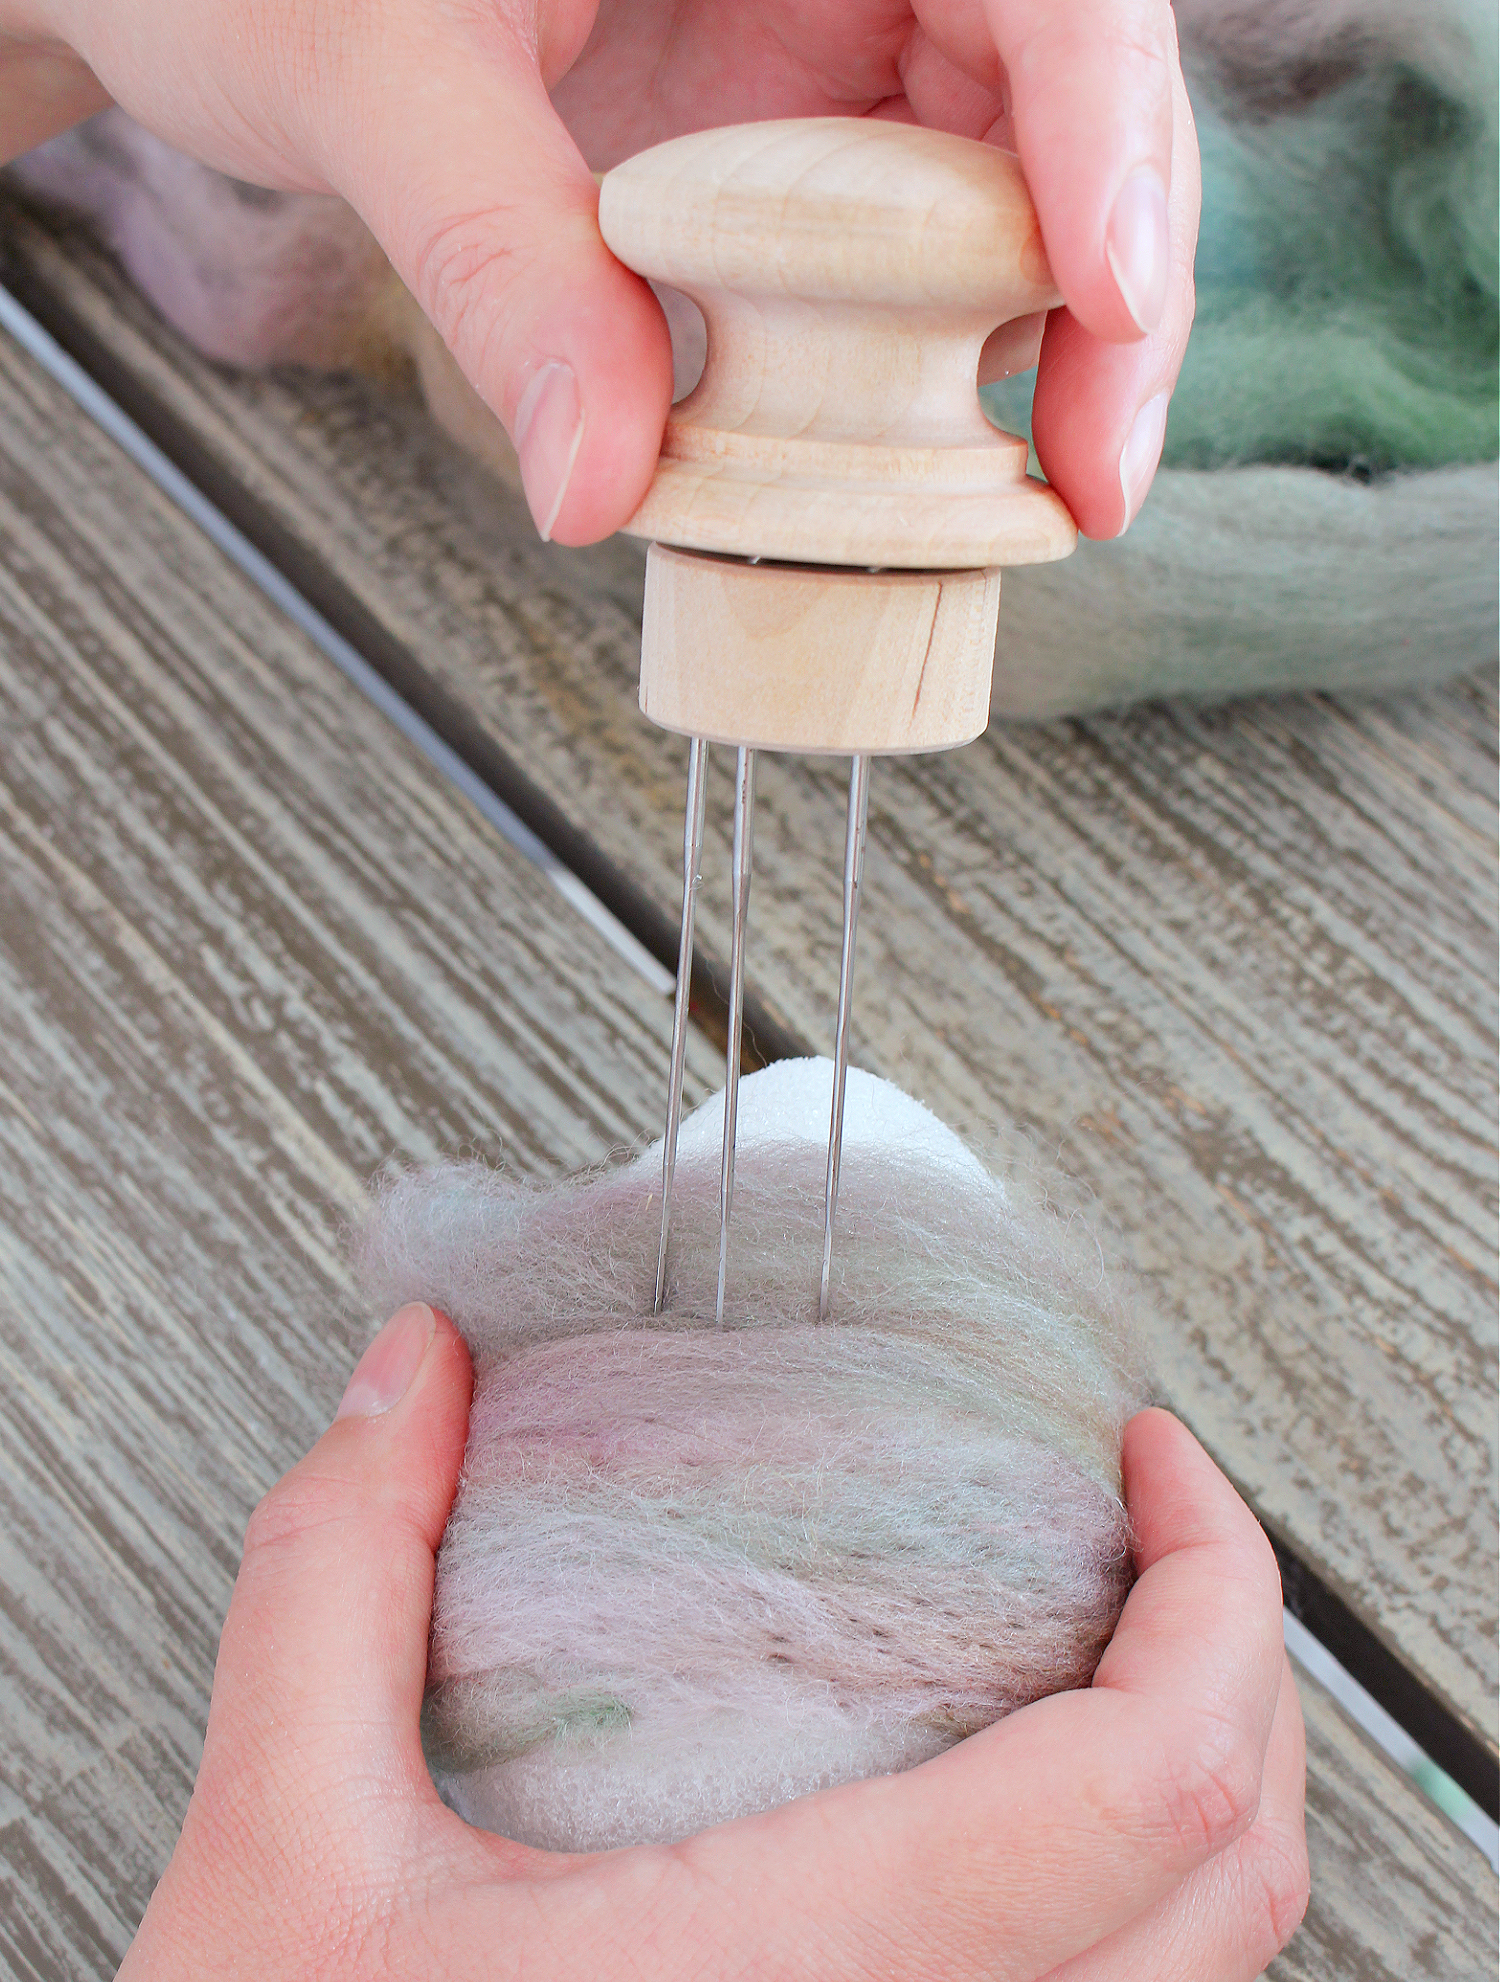 How Do You Make a Needle Felted Easter Egg?